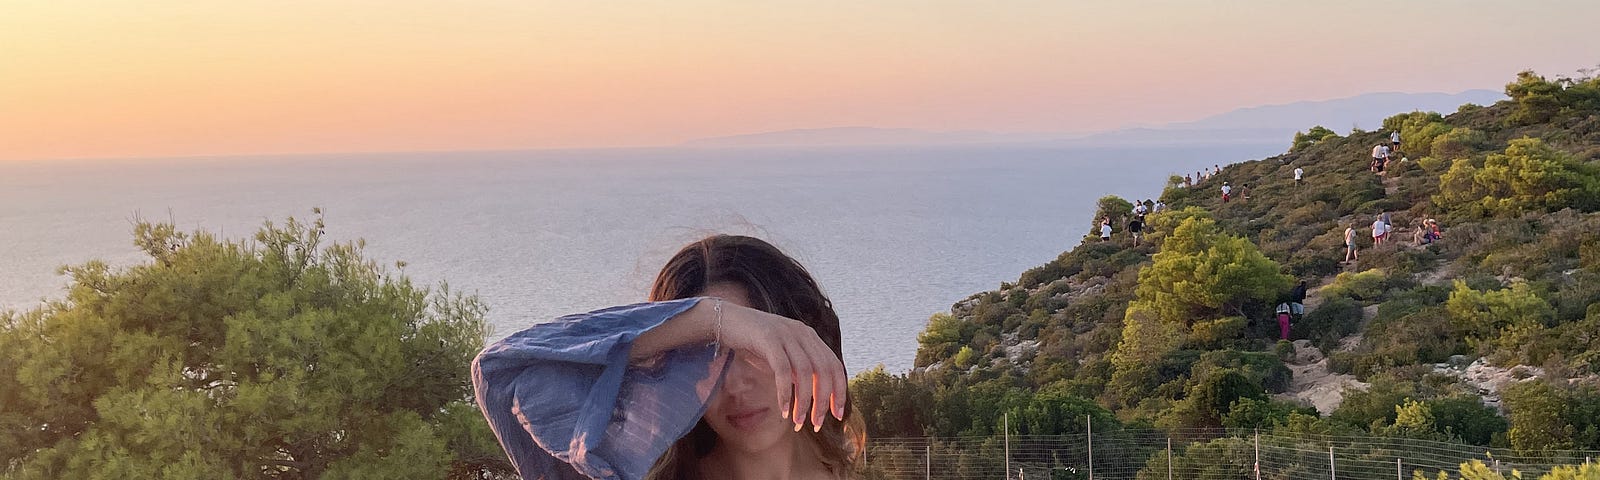 A beautiful landscape in Zakynthos, Greece, with trees, the sea and the sky during a sunset. A girl with long hair is right in the middle wearing blue covering her eyes ina poetic way.